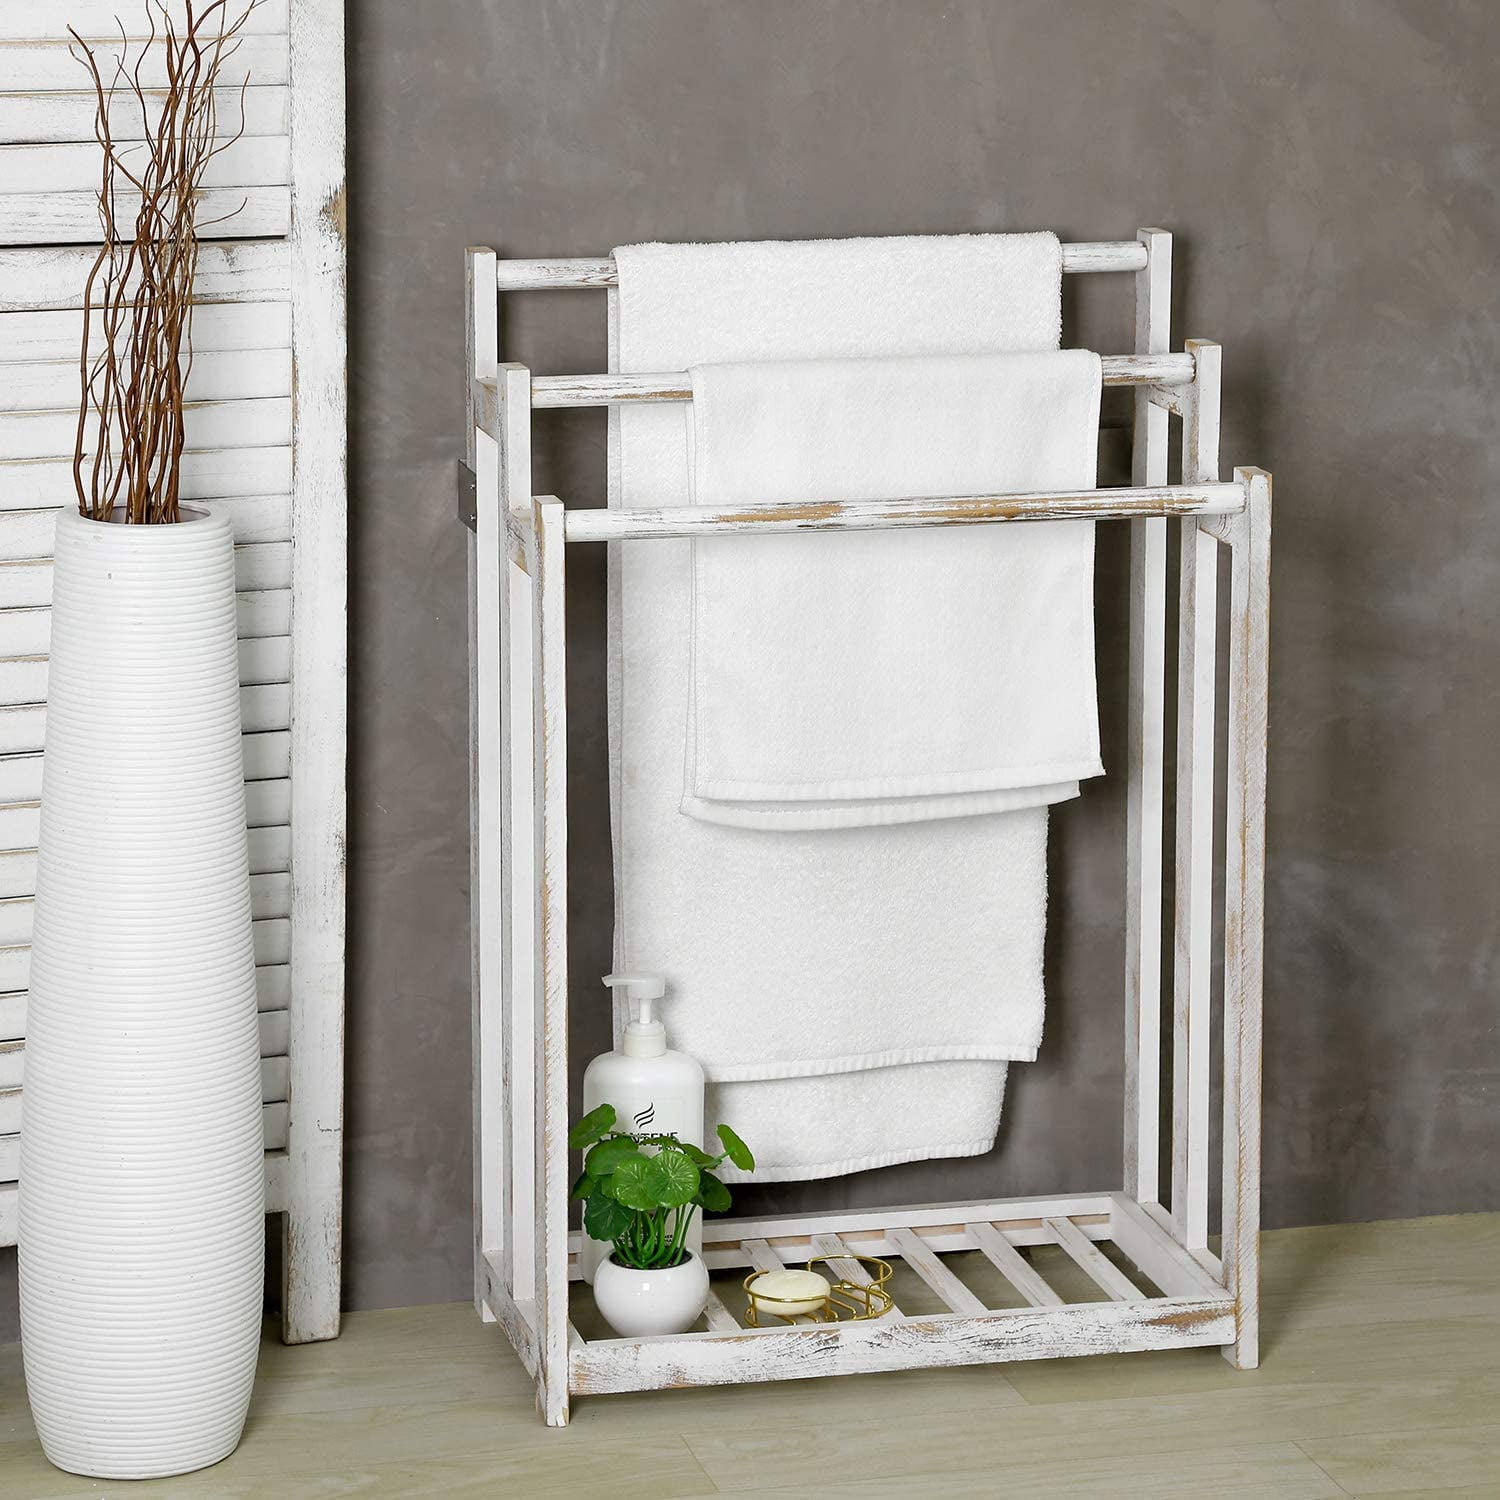 MyGift Wall Mounted White Washed Solid Wood Bathroom Shelf Rack with 2 Tier  Shelves and 3 Dual Hooks, Wall Hanging Storage Display for Bath Supplies